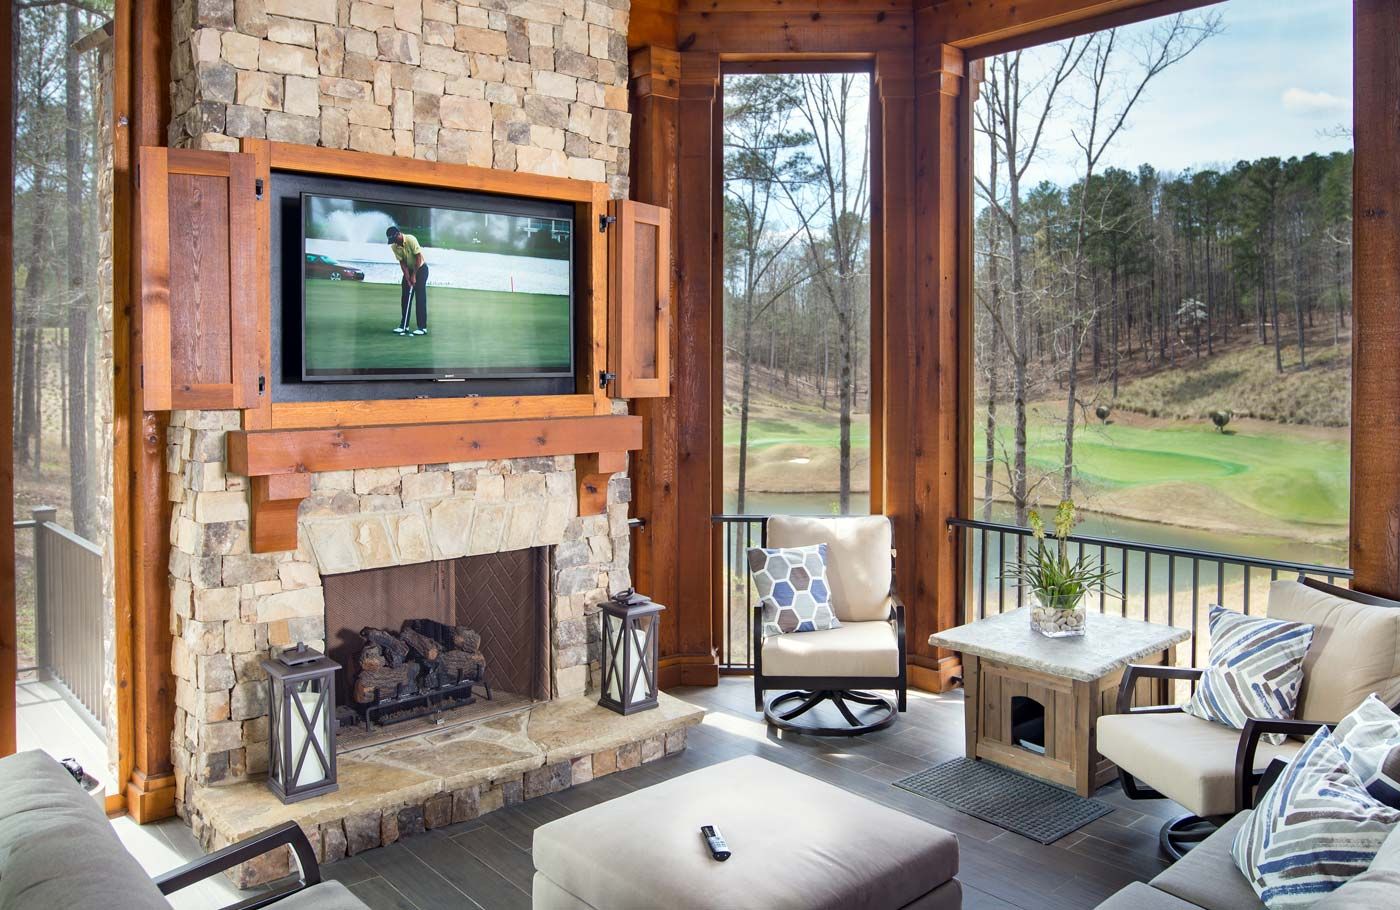 tv outdoors on patio with wooden accents